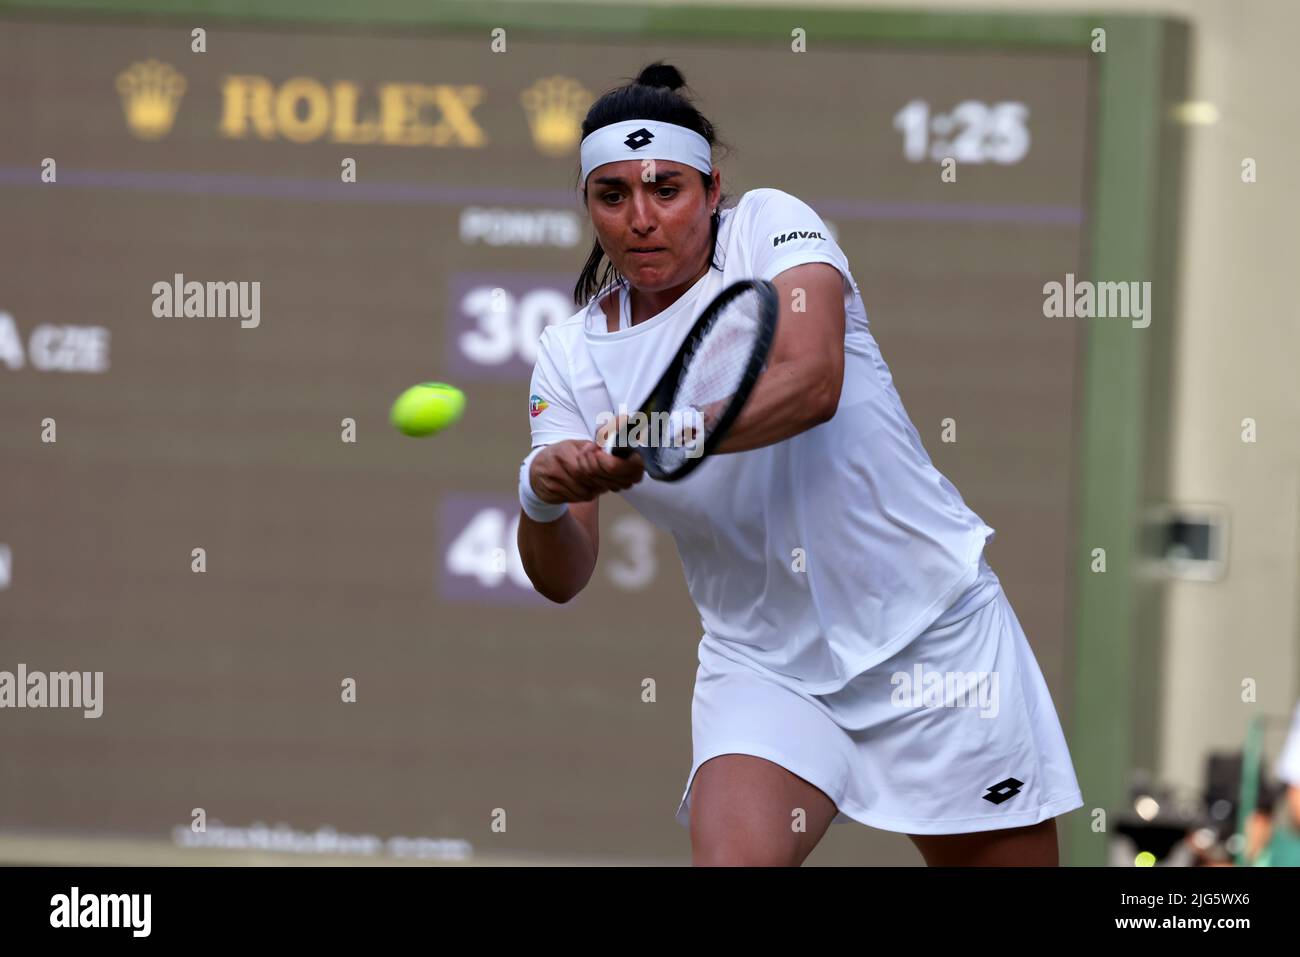 5 July 2022, All England Lawn Tennis Club, Wimbledon, London, United Kingdom:  Tunisia's Ons Jabeur strikes a backhand return to Marie Bouzkova of the Czech Republic during their quarterfinal match at Wimbledon today.  Jabeur won the match to advance to the semi finals. Stock Photo